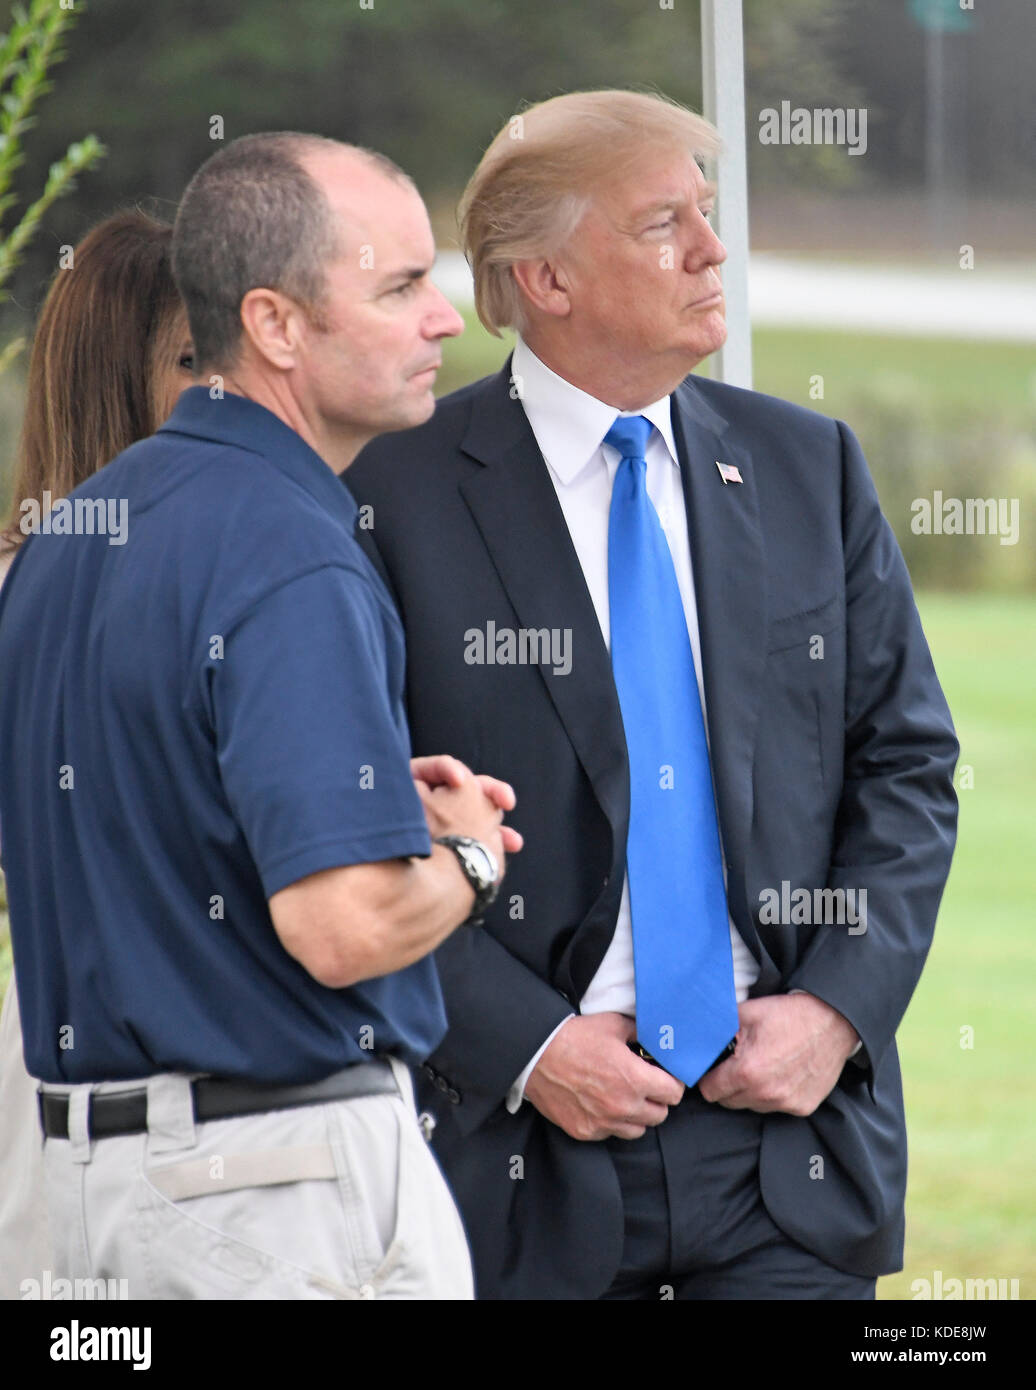 An unidentified United States Secret Service agent speaks with US President Donald J. Trump as he tours the US Secret Service James J. Rowley Training Center in Beltsville, Maryland on Friday, October 13, 2017. Credit: Ron Sachs/Pool via CNP /MediaPunch Stock Photo